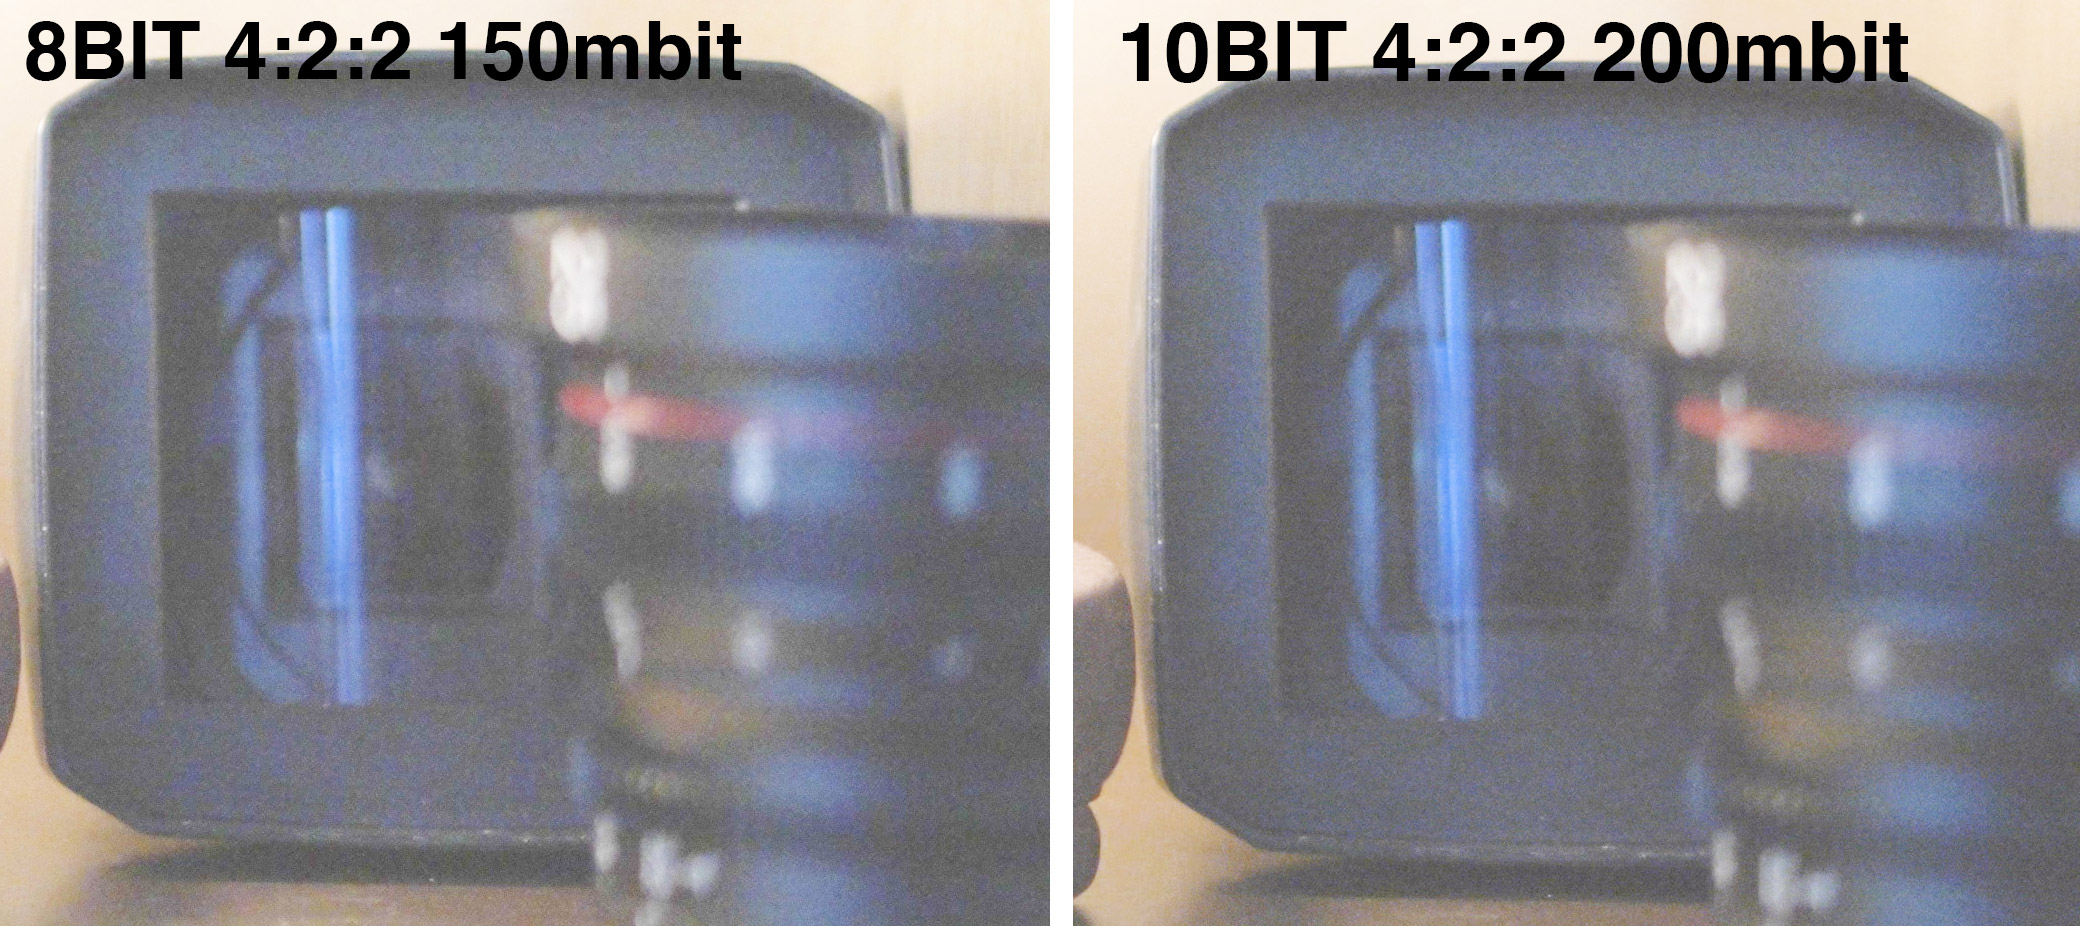 Sony A6700 vs FX30 - The 10 Main Differences - Mirrorless Comparison